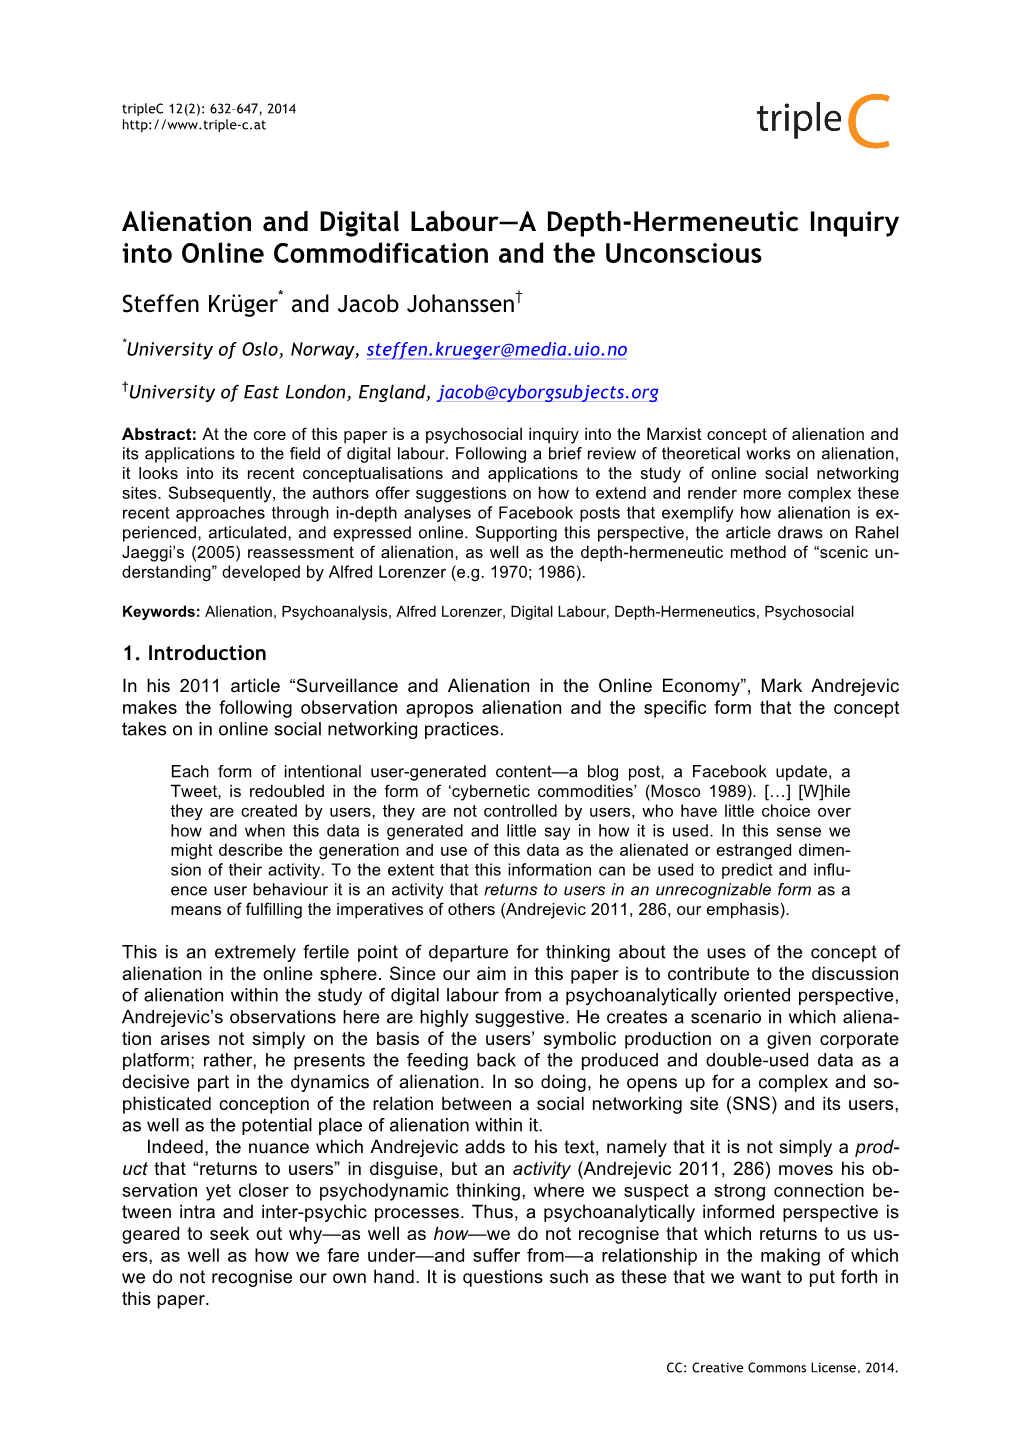 Alienation and Digital Labour—A Depth-Hermeneutic Inquiry Into Online Commodification and the Unconscious